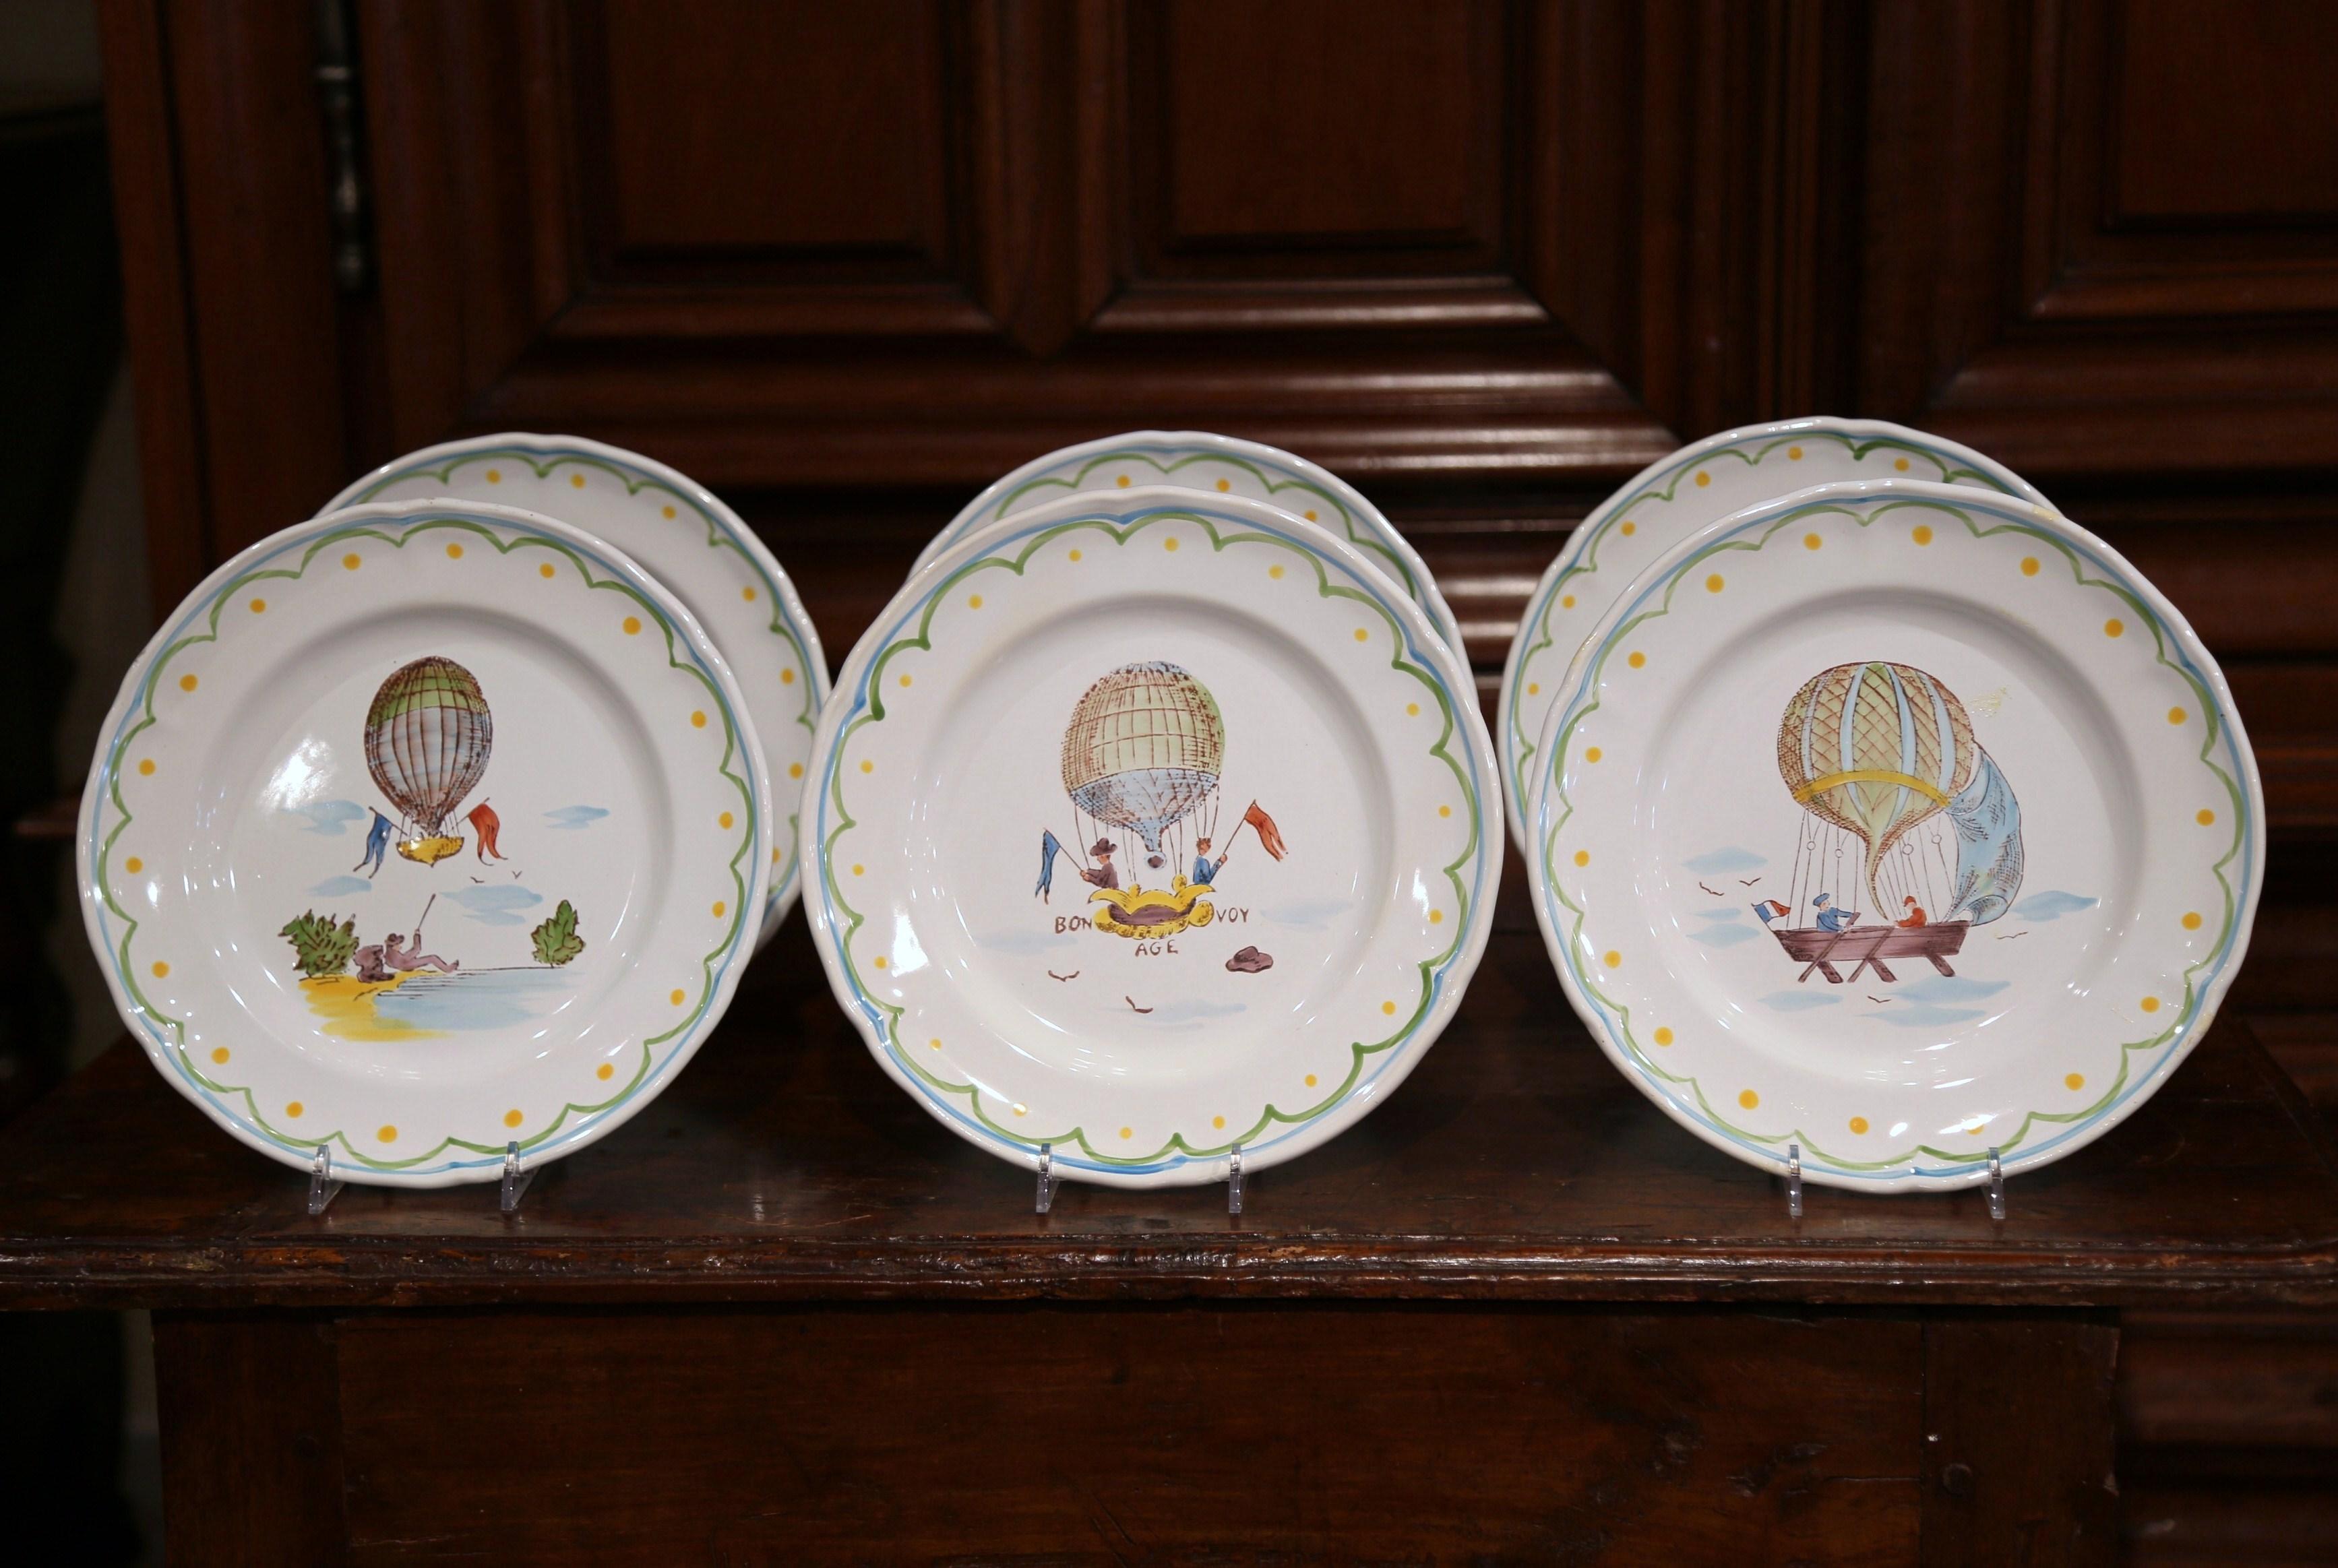 Decorate a kitchen wall or fill up a decorative hutch with this beautiful set of hand painted, ceramic plates. Crafted circa 2000 in Pornic, France, each hand painted plate is different and features individual hot air balloon scenes and accompanying